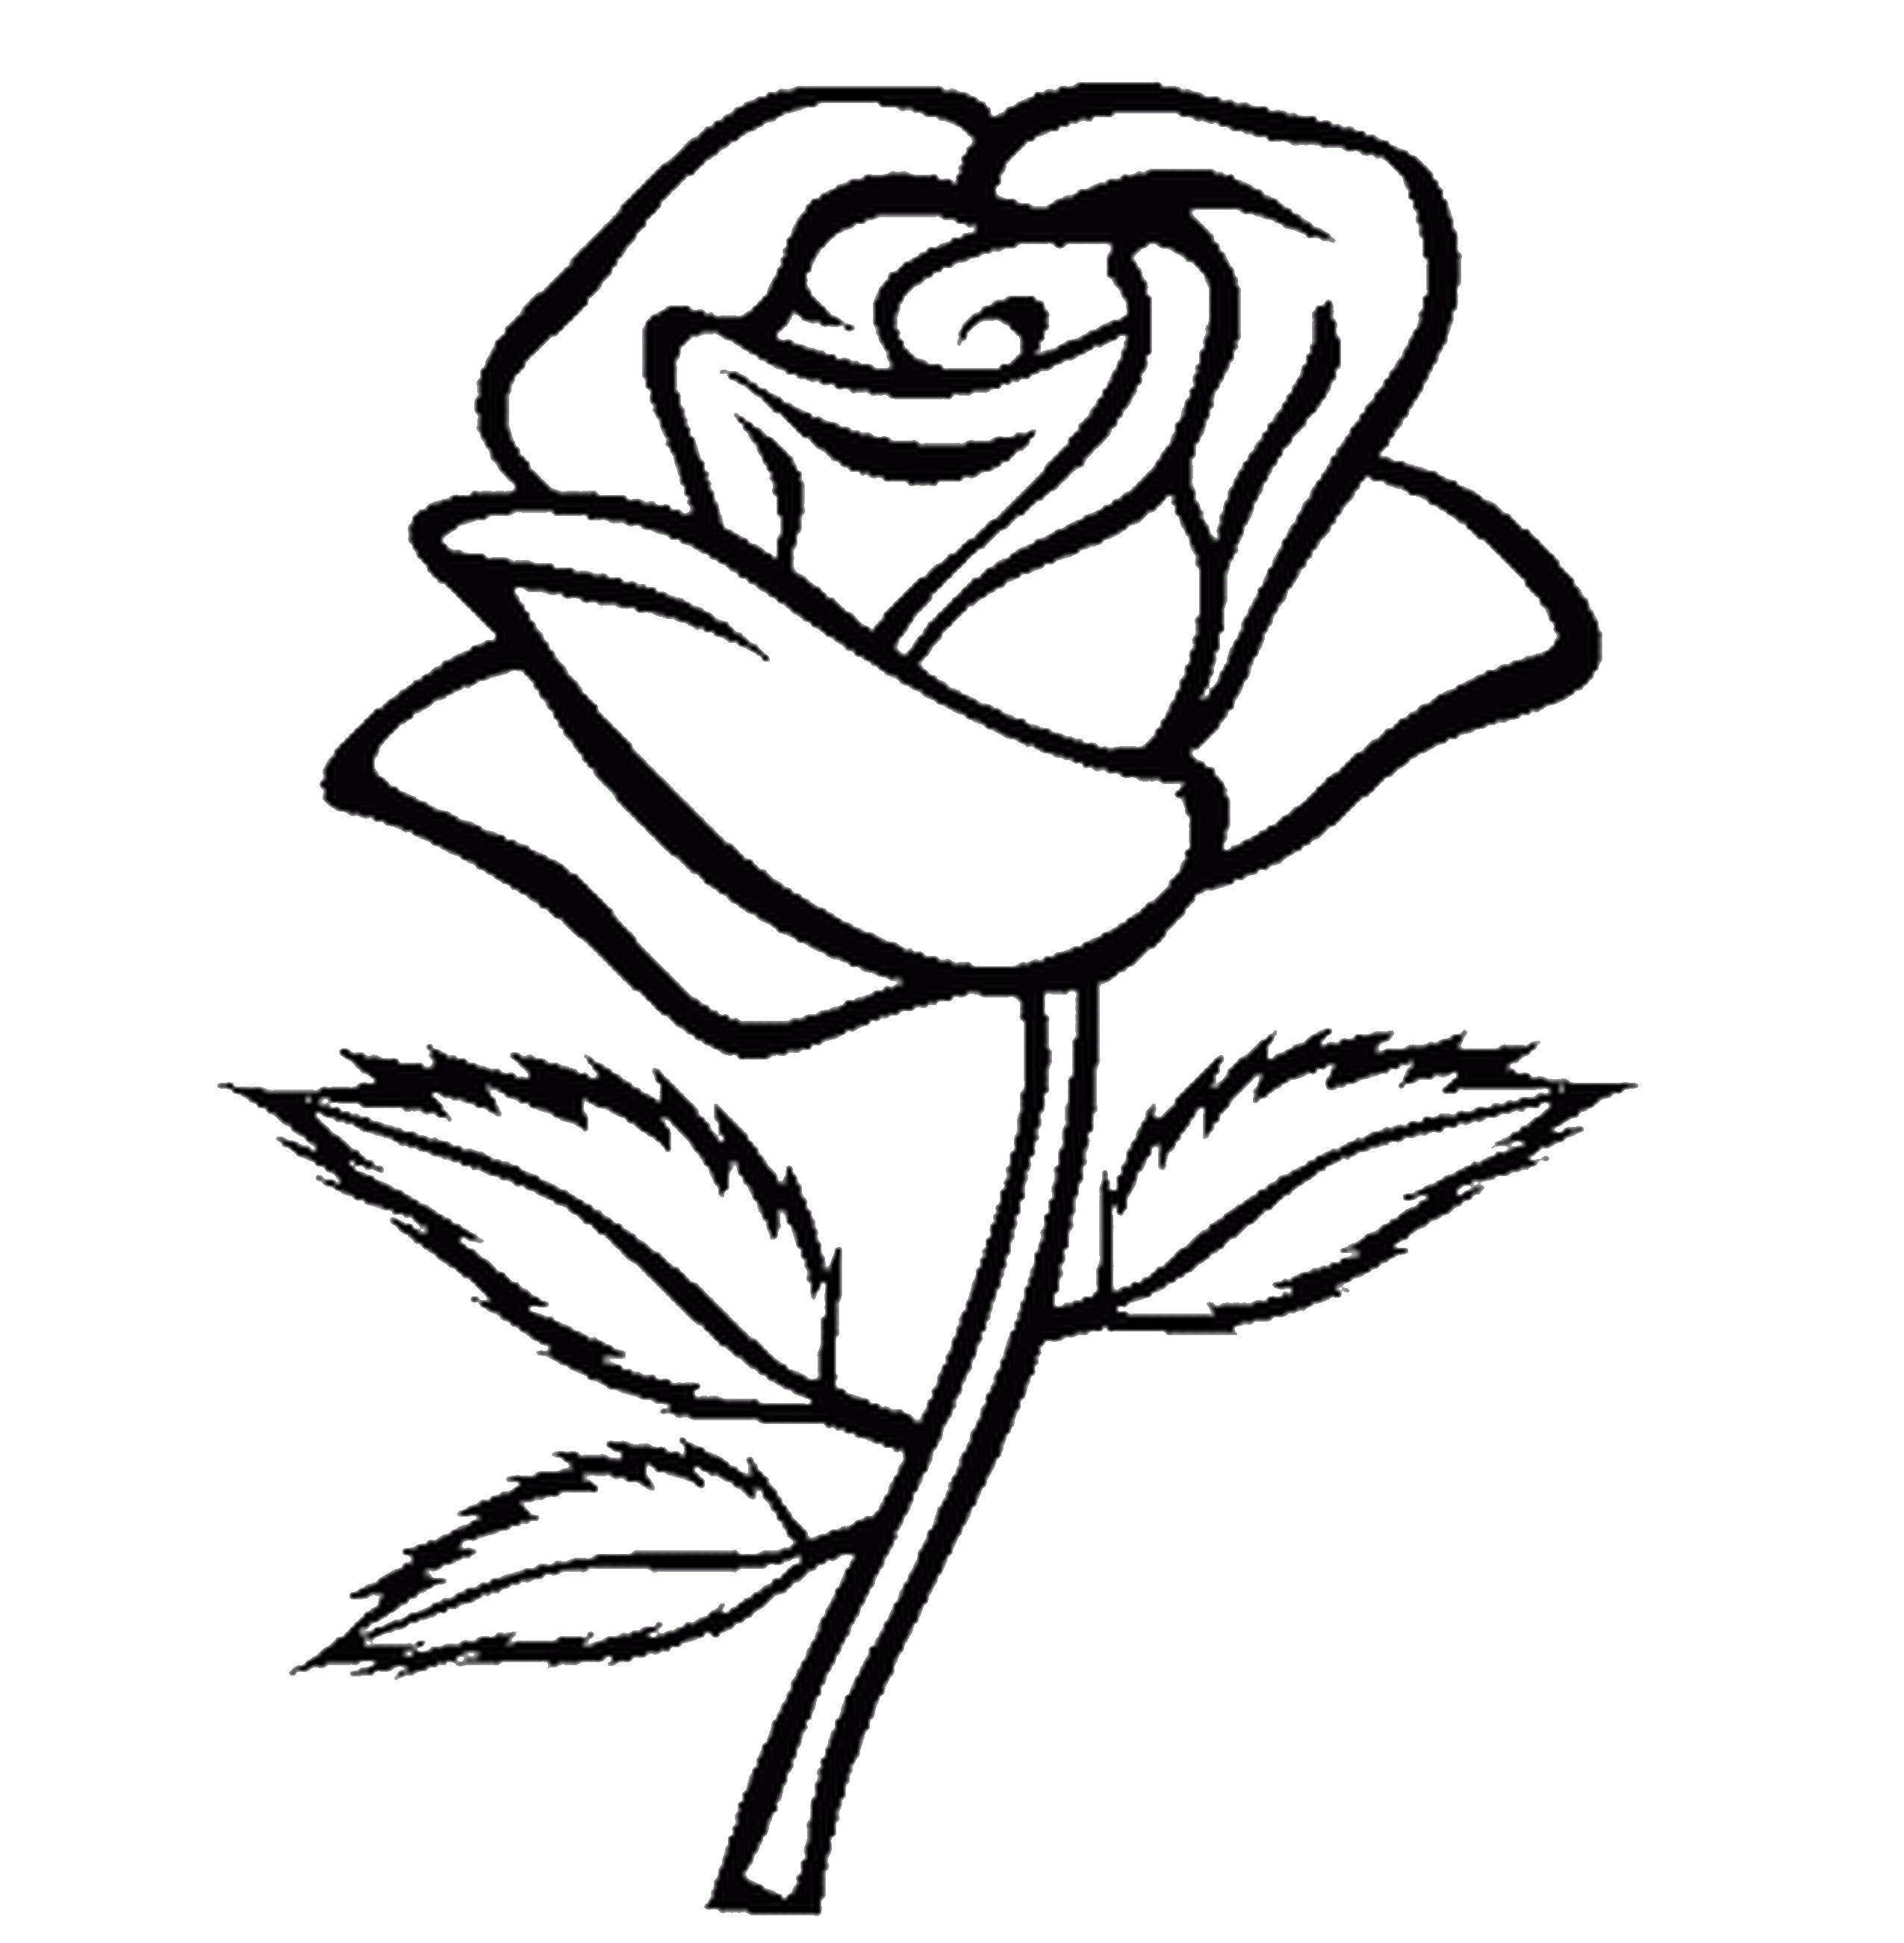 Coloring Rose. Category flowers. Tags:  flowers, roses, leaves.